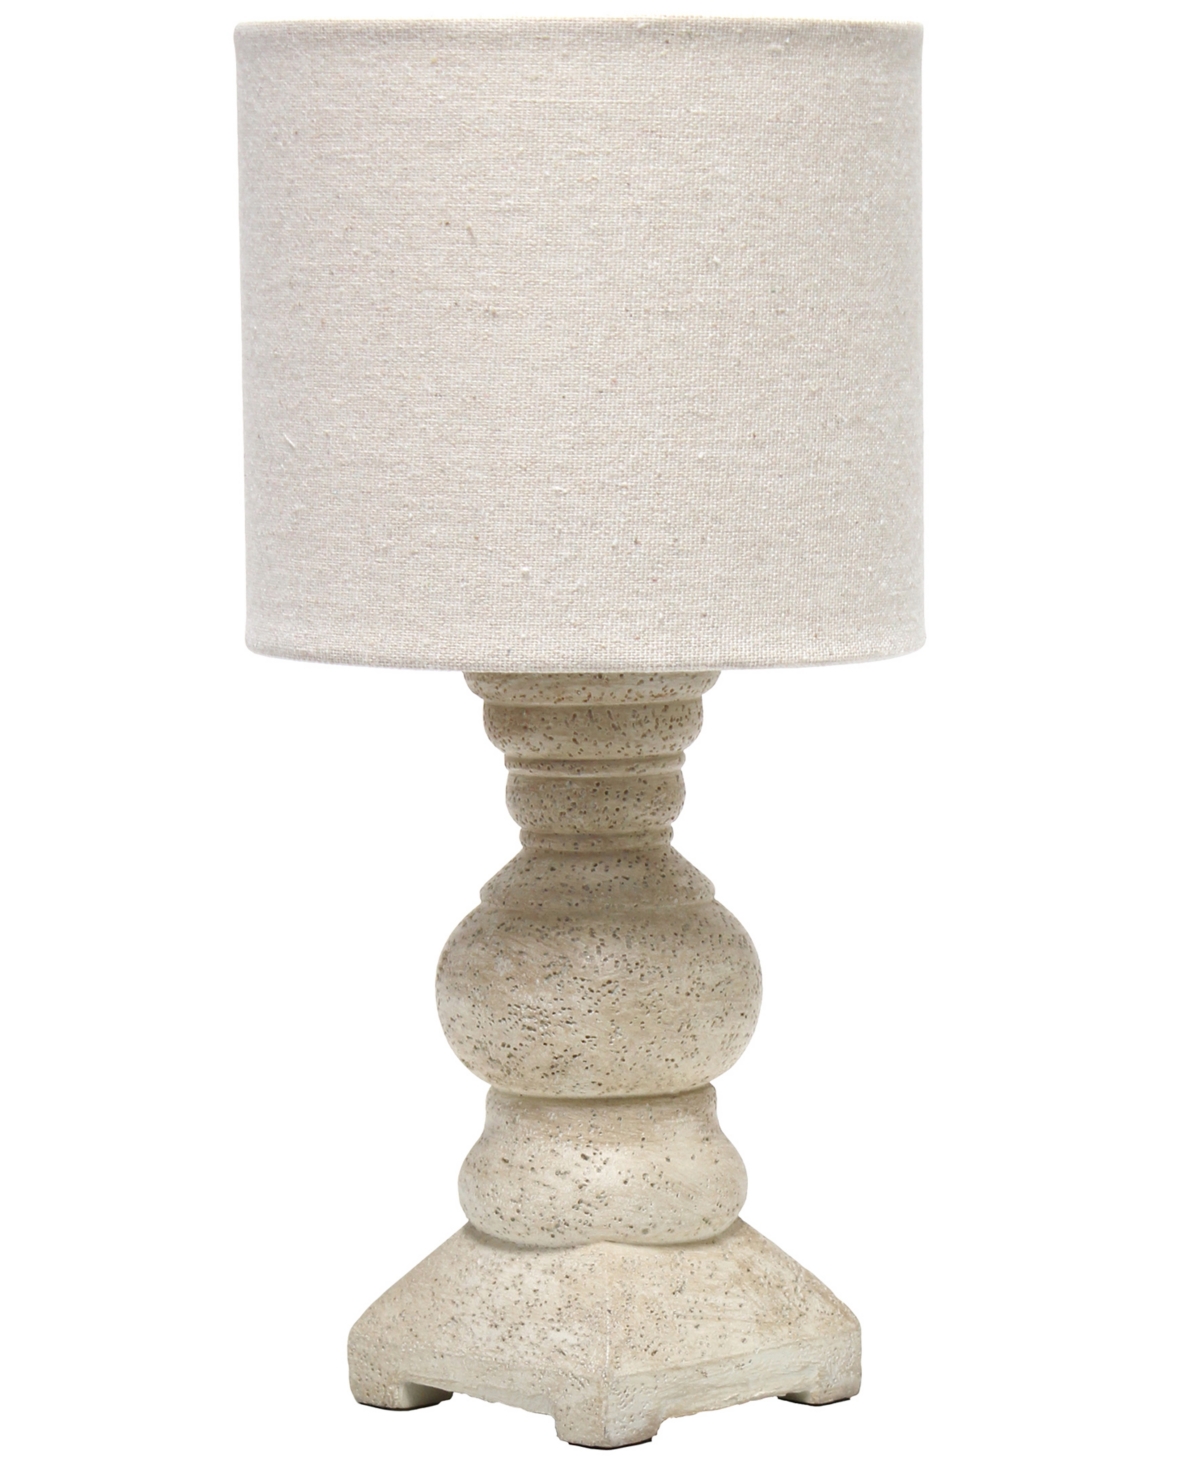 Shop Lalia Home 12.5" Organix Rustic Farmhouse Distressed Neutral Resin Base Mini Table Desk Lamp With Beige Fabric  In Weathered